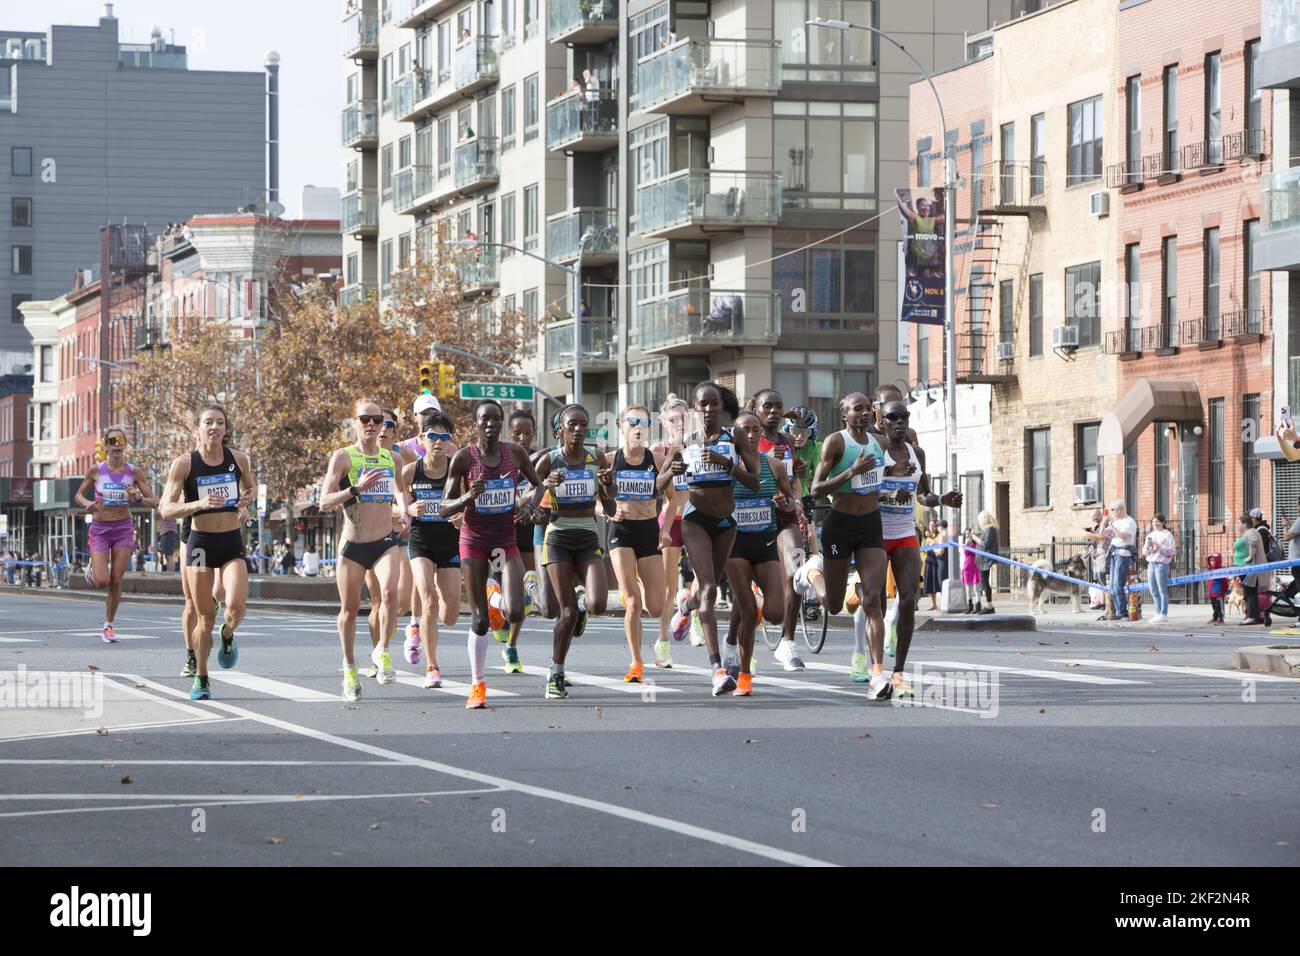 2022 TCS New York City Marathon runners cruise up 4th Avenue through Park Slope Brooklyn during the first leg of the race. Sharon Lokedi from Kenya (right side with red top)eventually won the race. Stock Photo